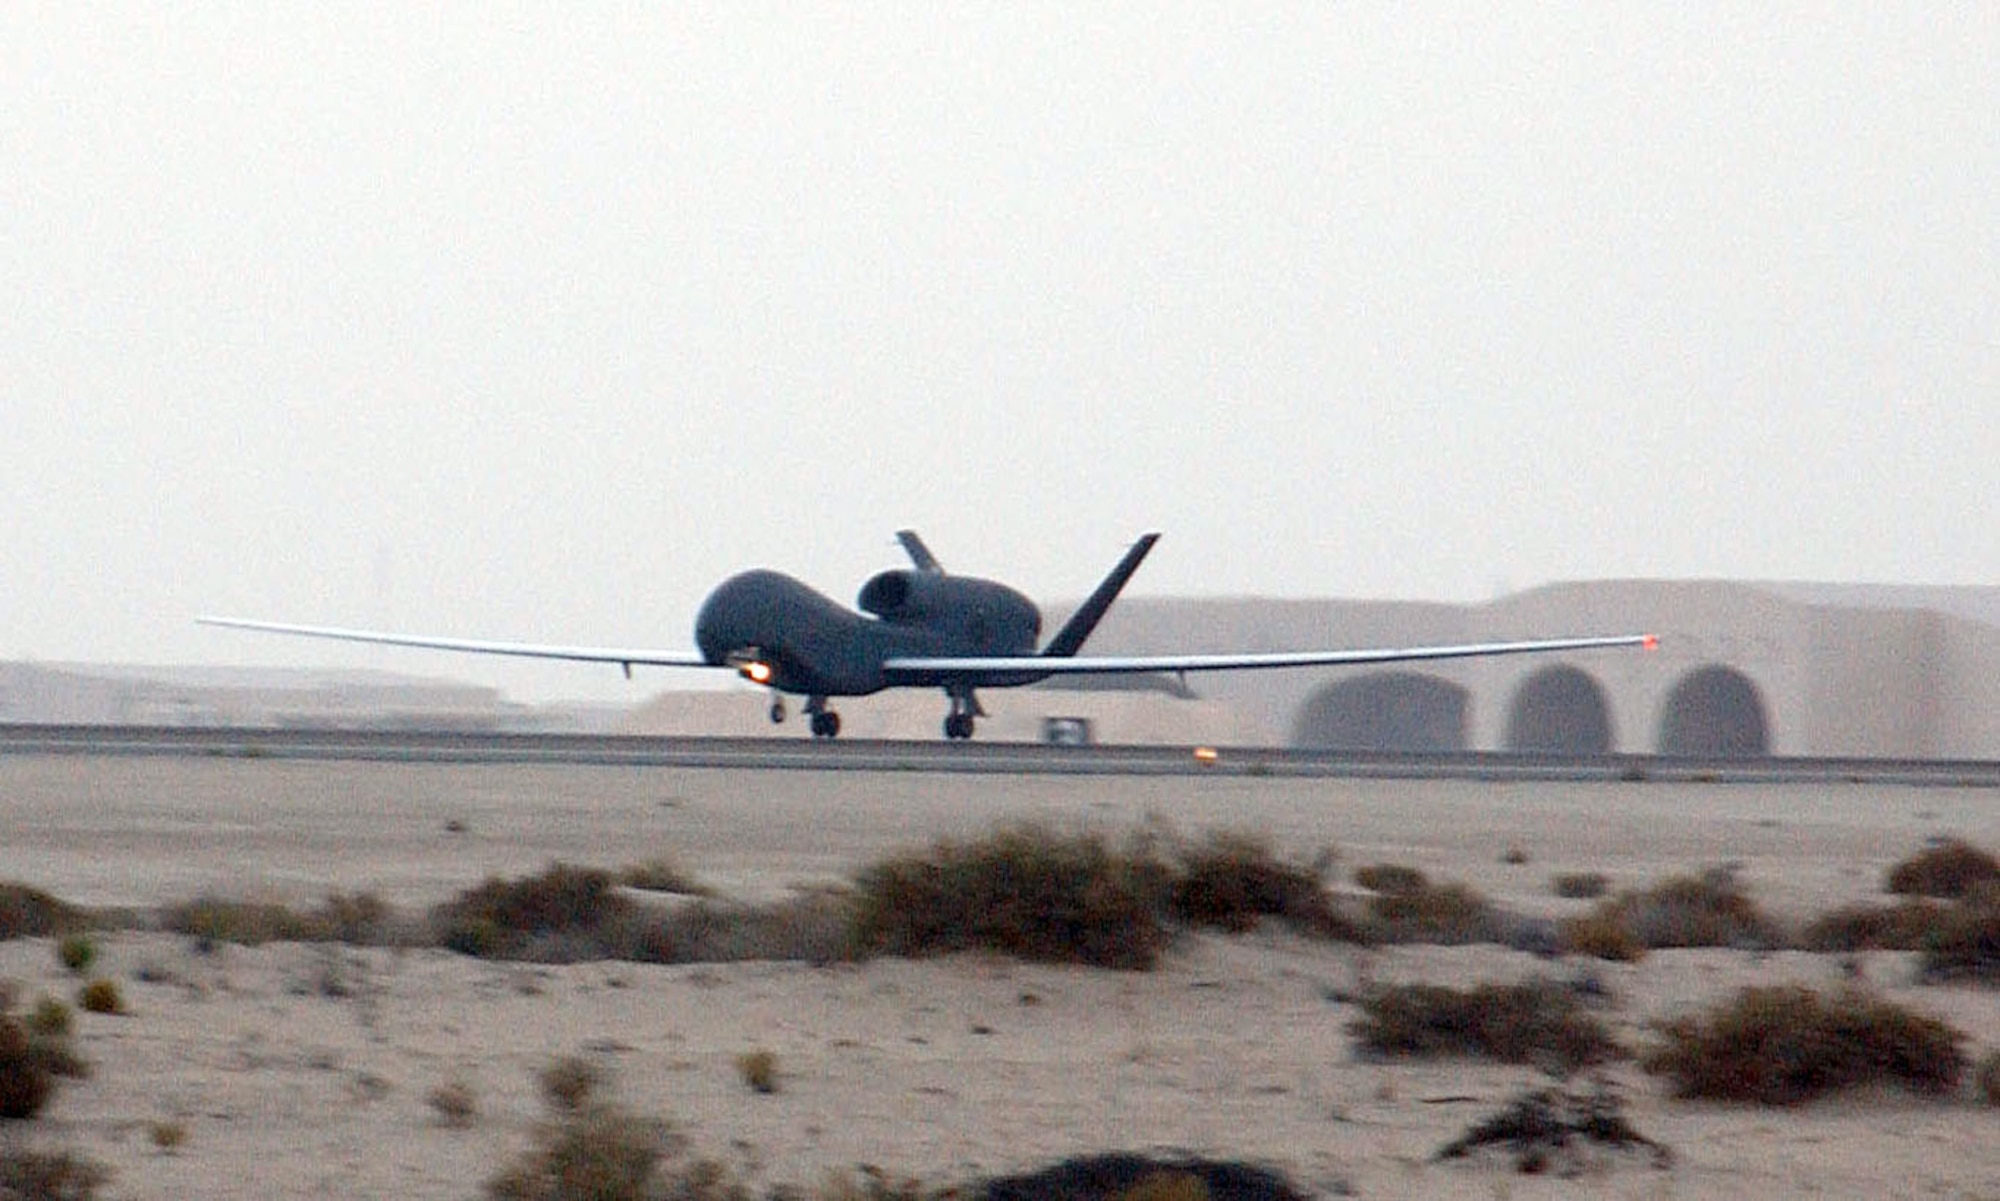 SOUTHWEST ASIA (AFPN) -- A Global Hawk taxis down the runway after landing at a desert base. The unmanned aerial vehicle is the Air Force's second deployed production Global Hawk. The two UAVs are the first production models deployed. Previous Global Hawks were prototypes or test models. (U.S. Air Force photo by Tech. Sgt. Mike Hammond)
